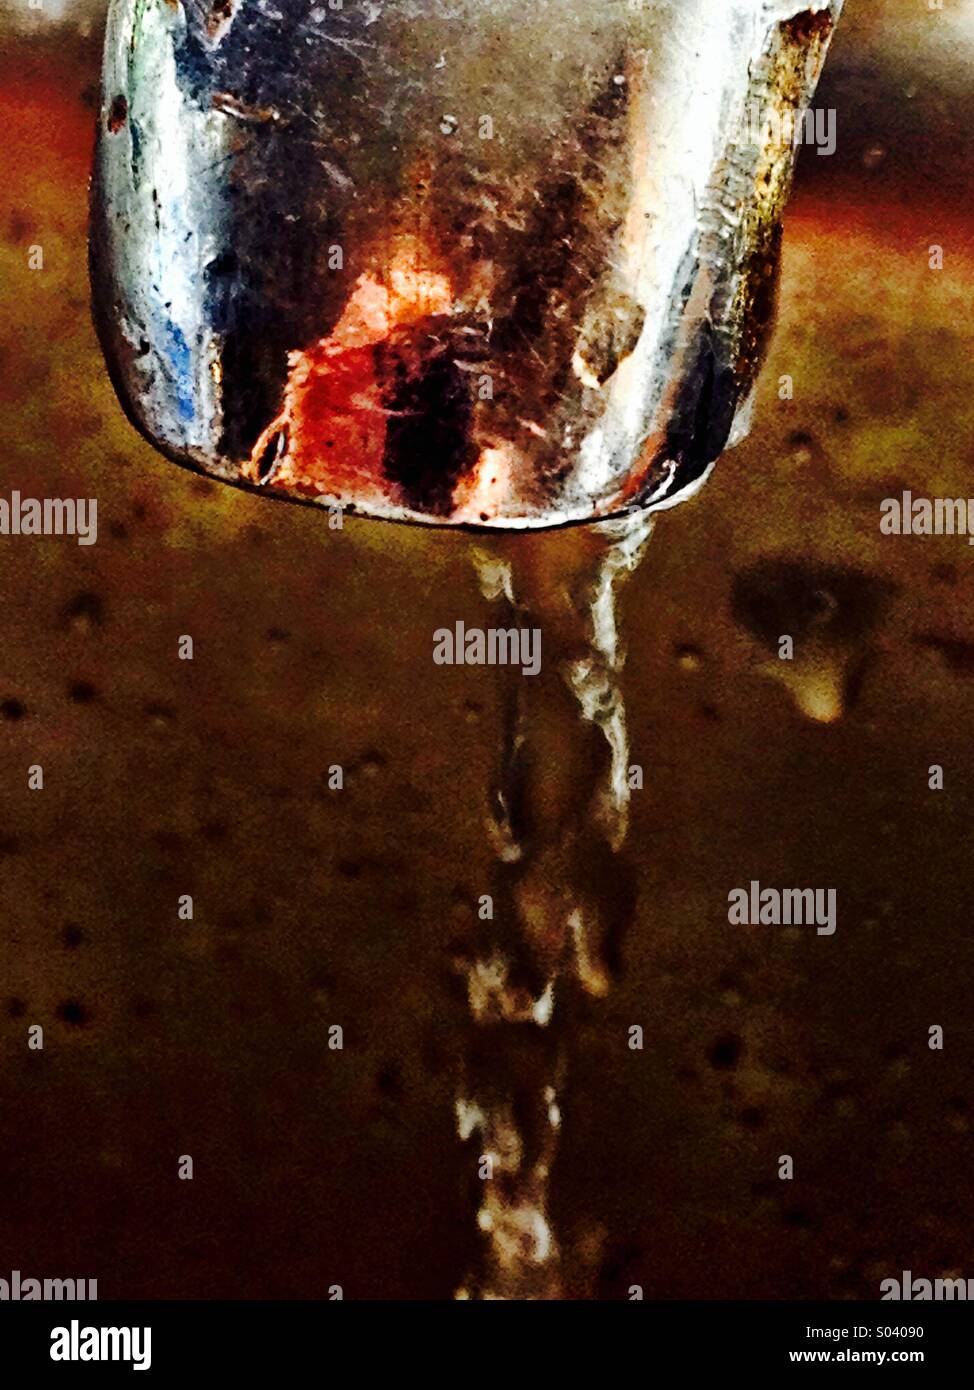 Dripping tap Stock Photo